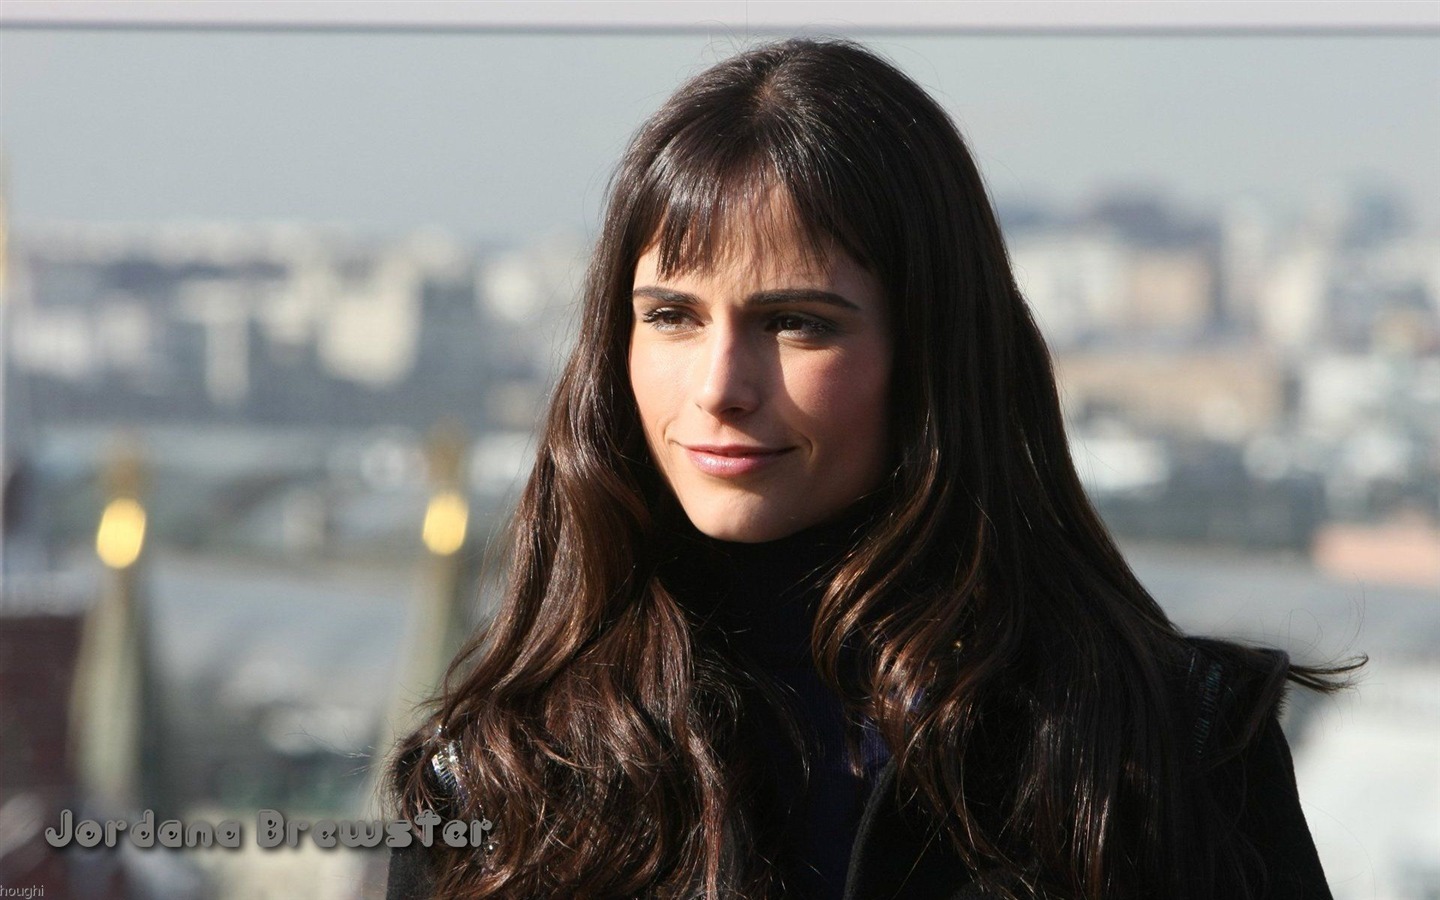 Jordana Brewster #018 - 1440x900 Wallpapers Pictures Photos Images